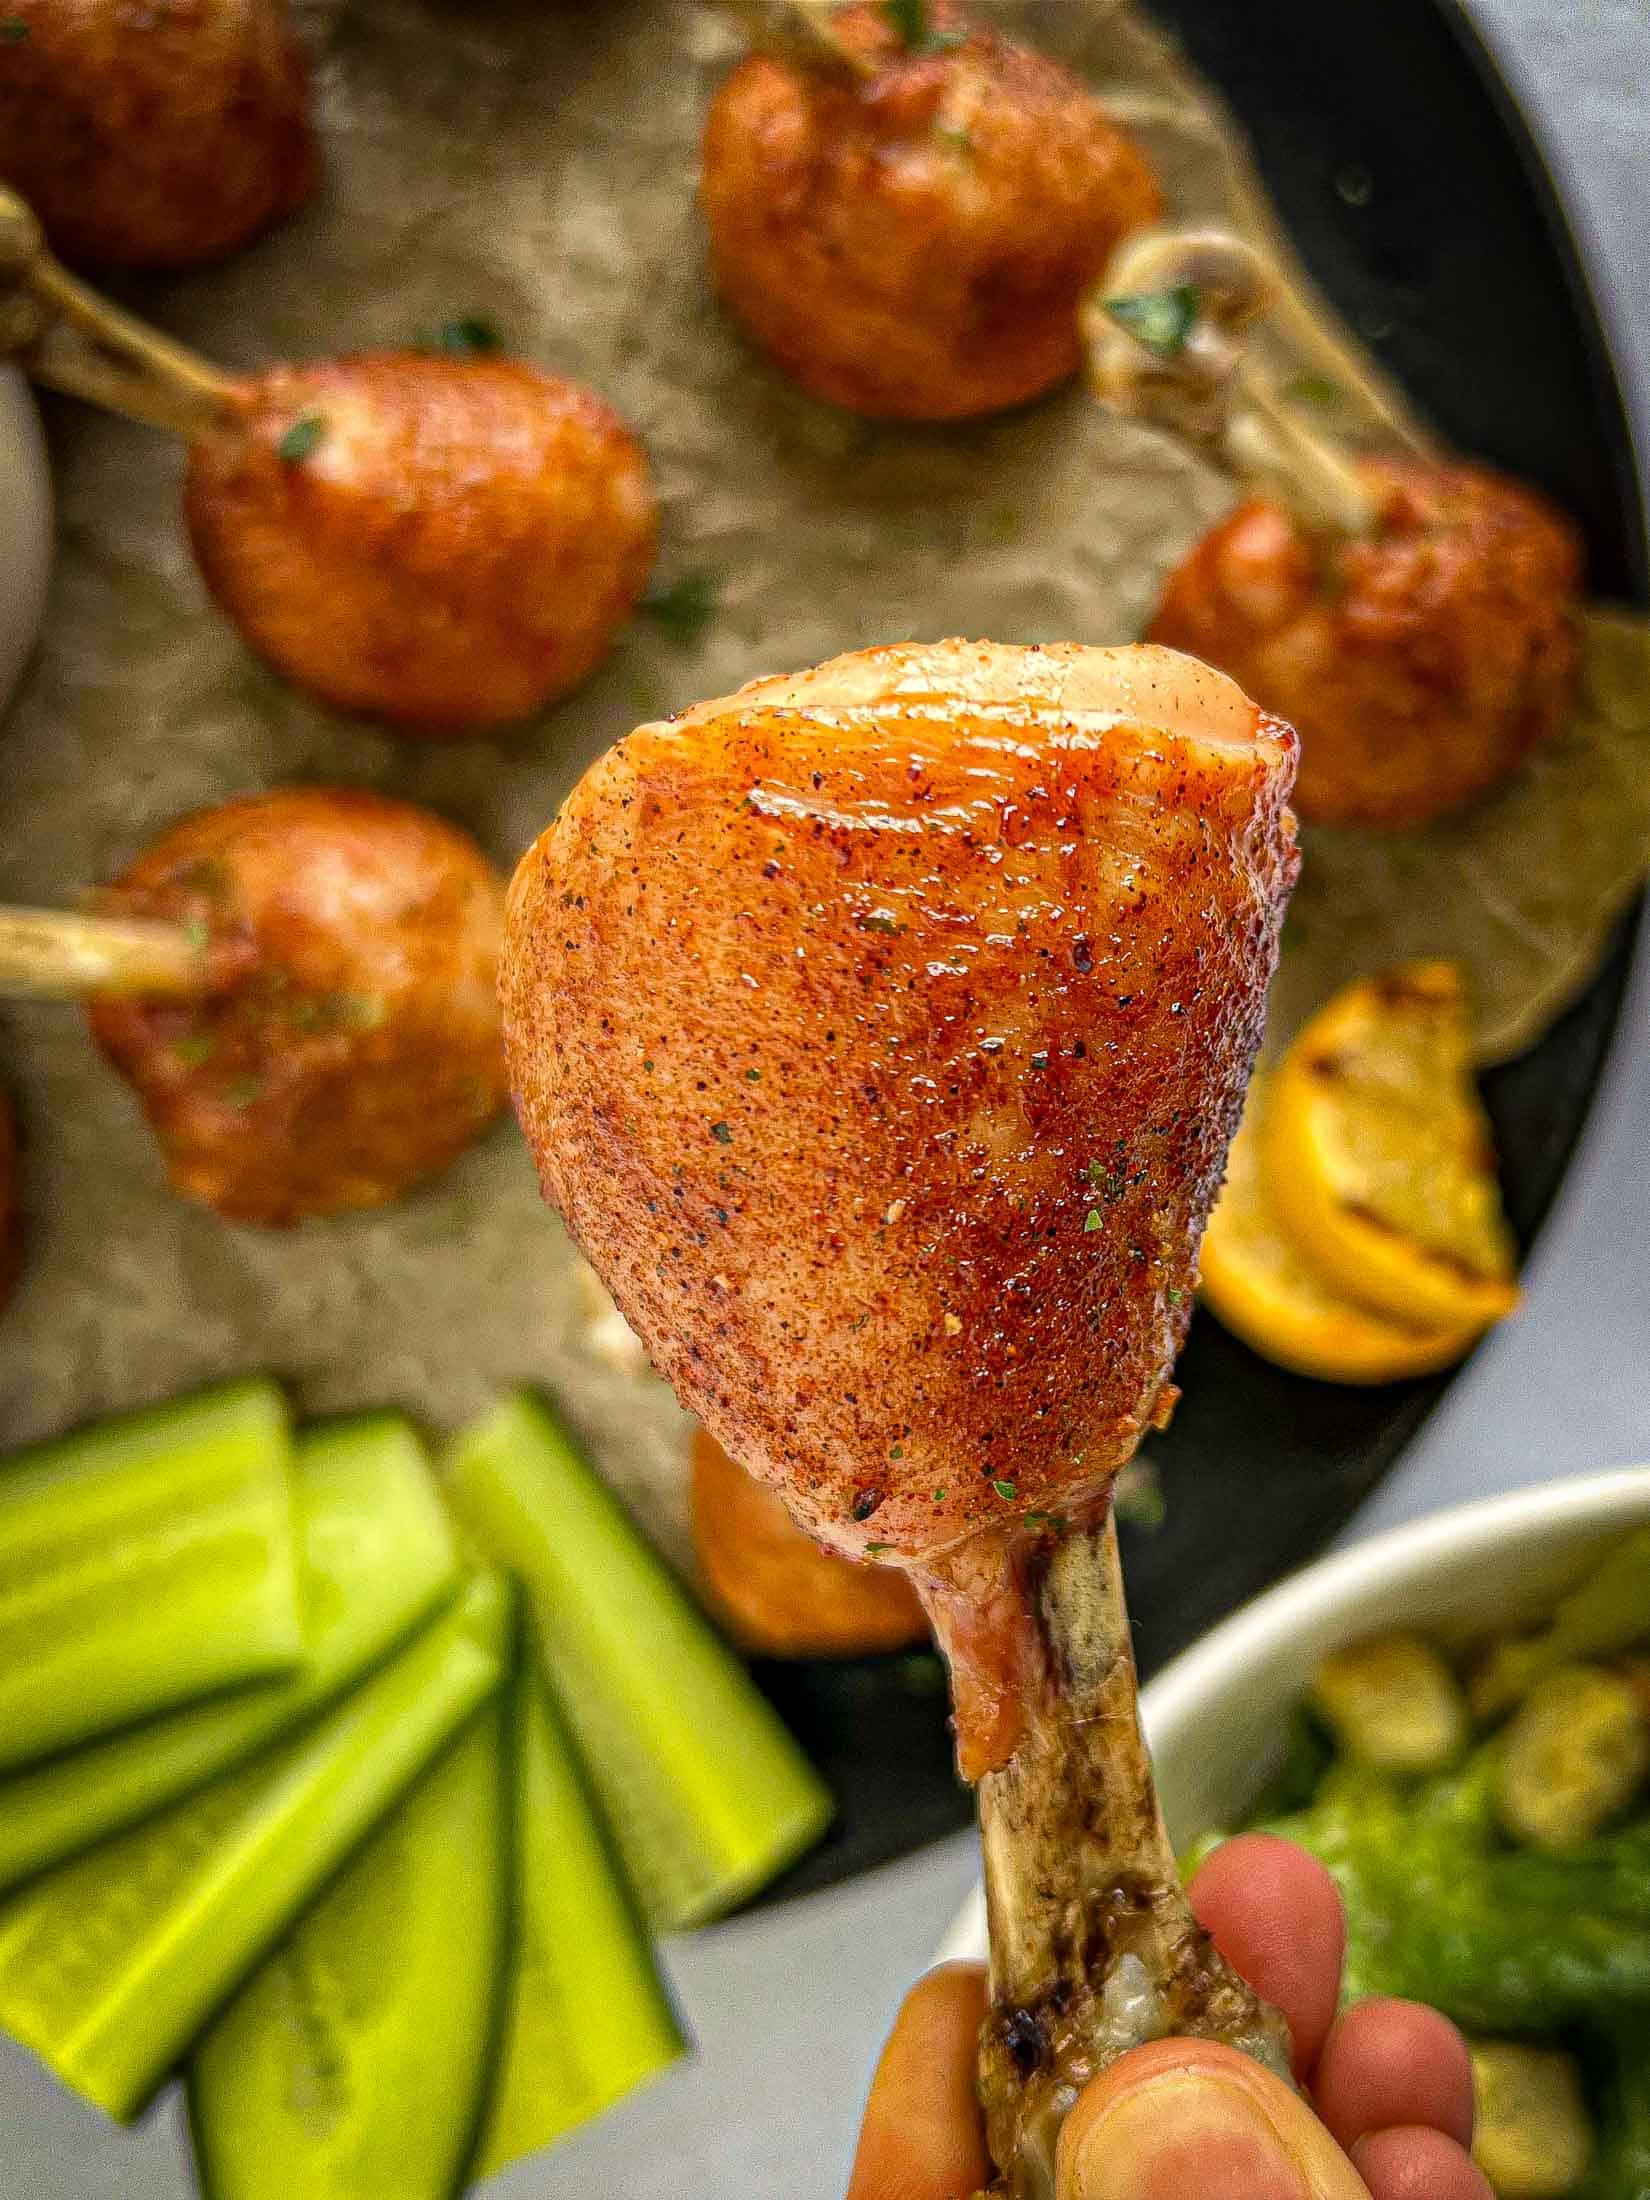 A grilled chicken lollipop drumstick being held out to showcase the finished product.